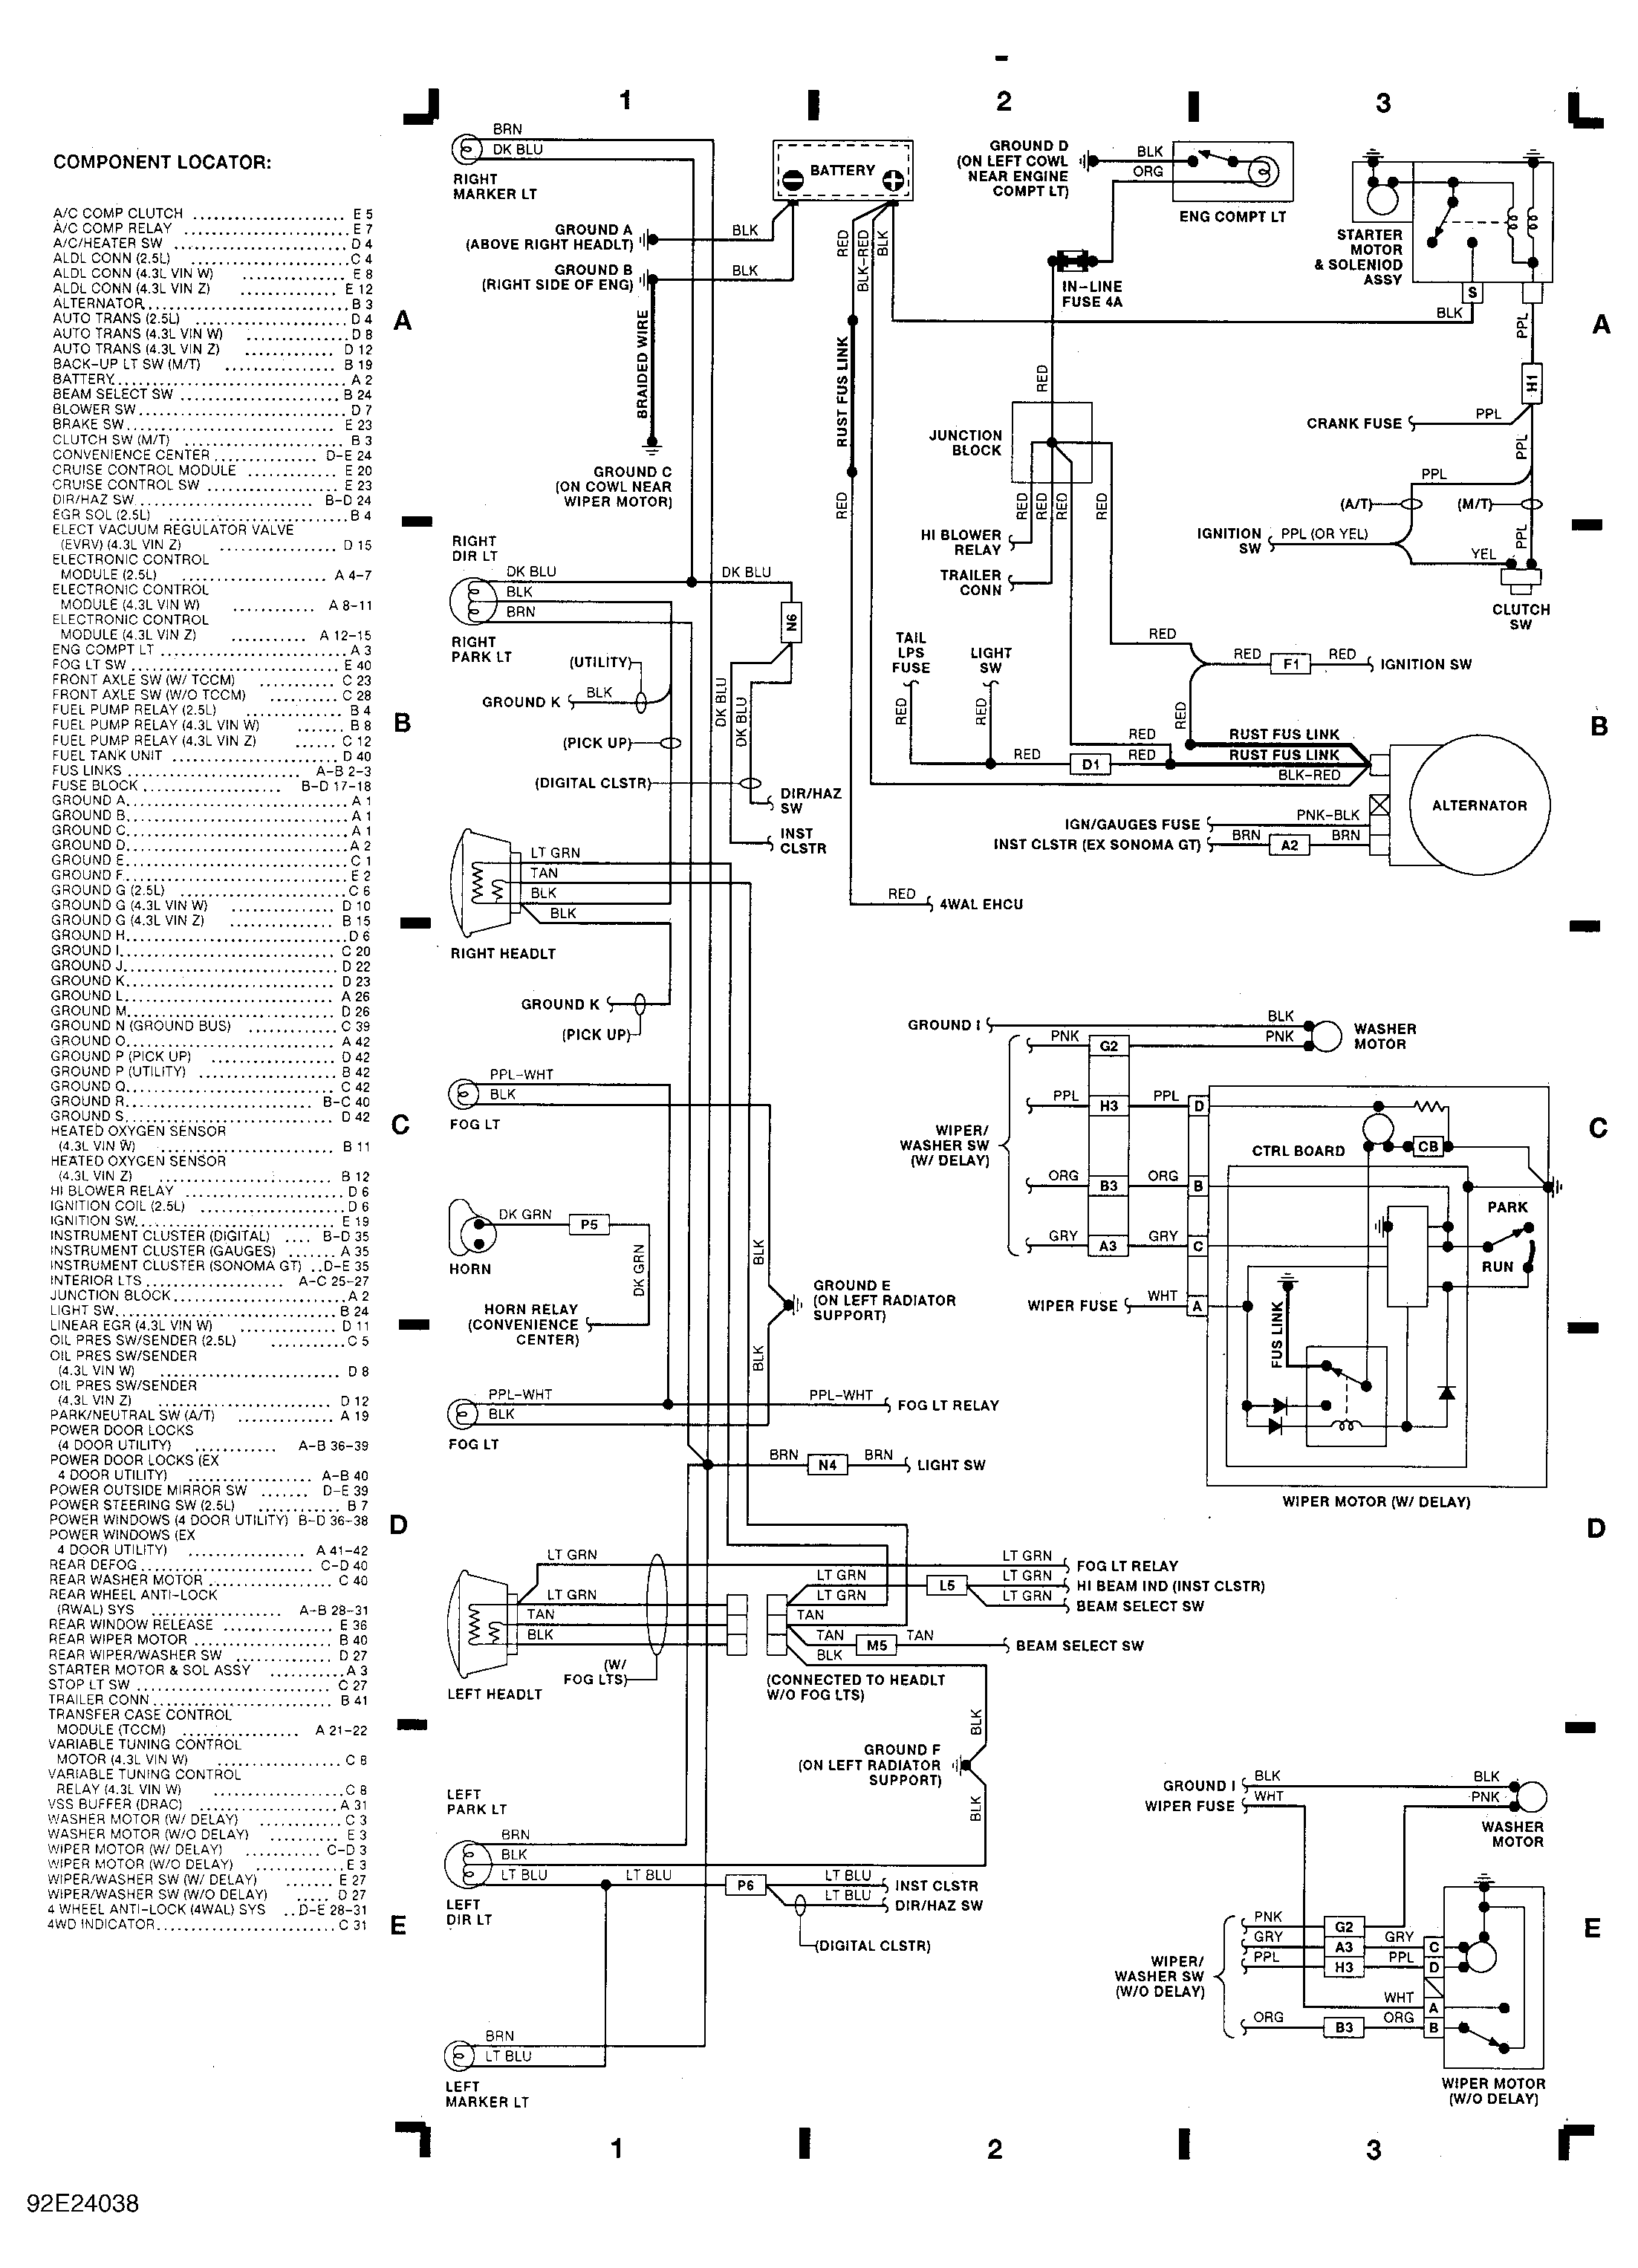 Starter Wiring Diagrams: I Have a Chevy Blazer 1999 That Will Not